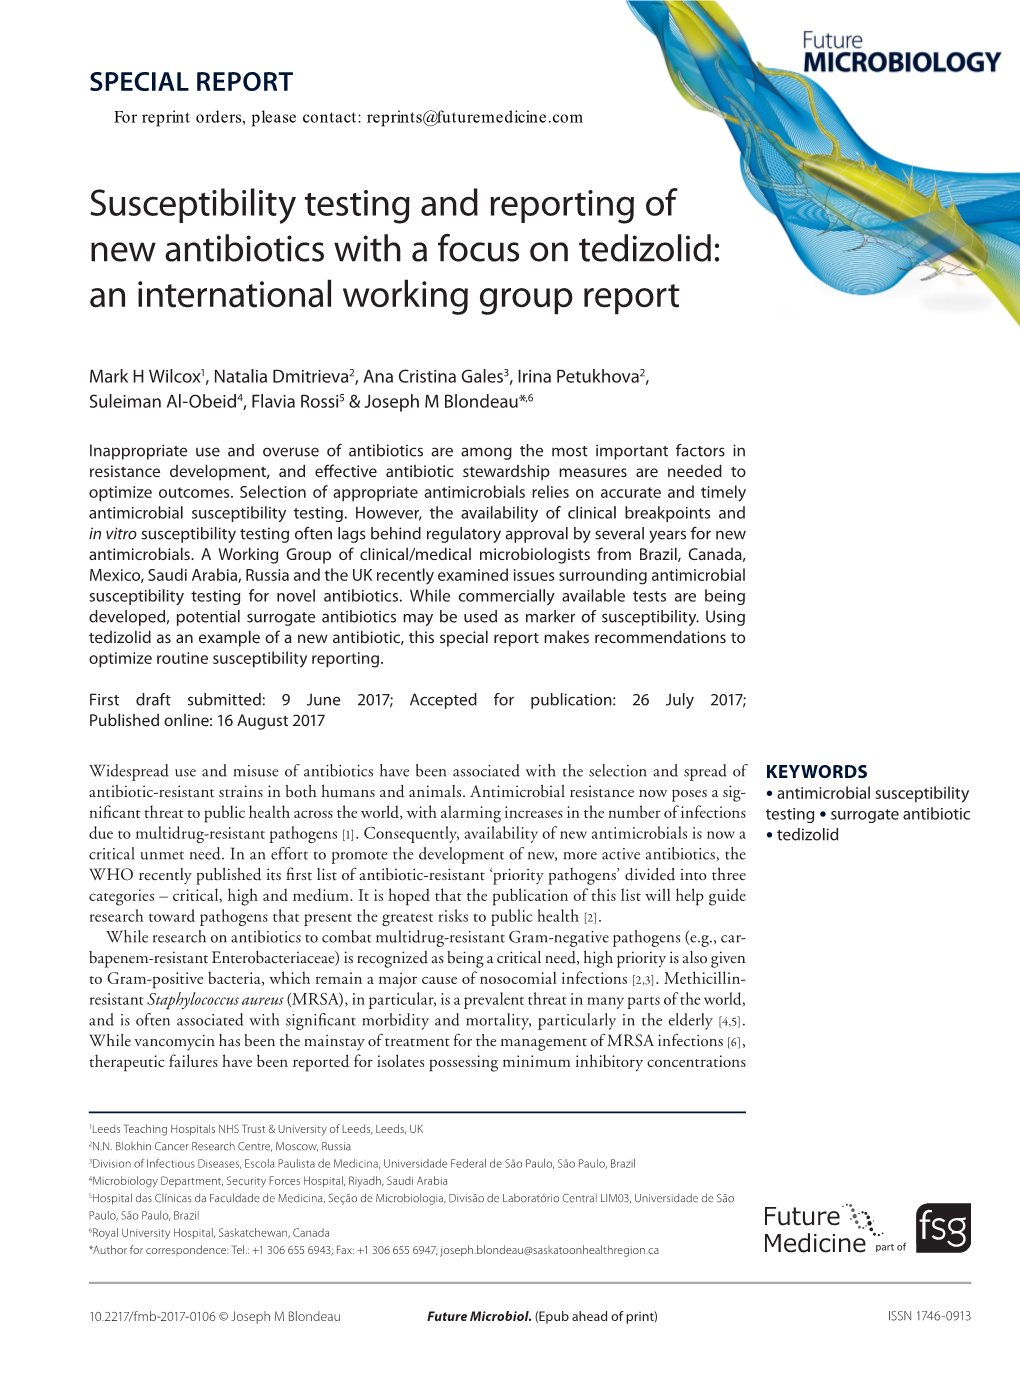 Susceptibility Testing and Reporting of New Antibiotics with a Focus on Tedizolid: an International Working Group Report